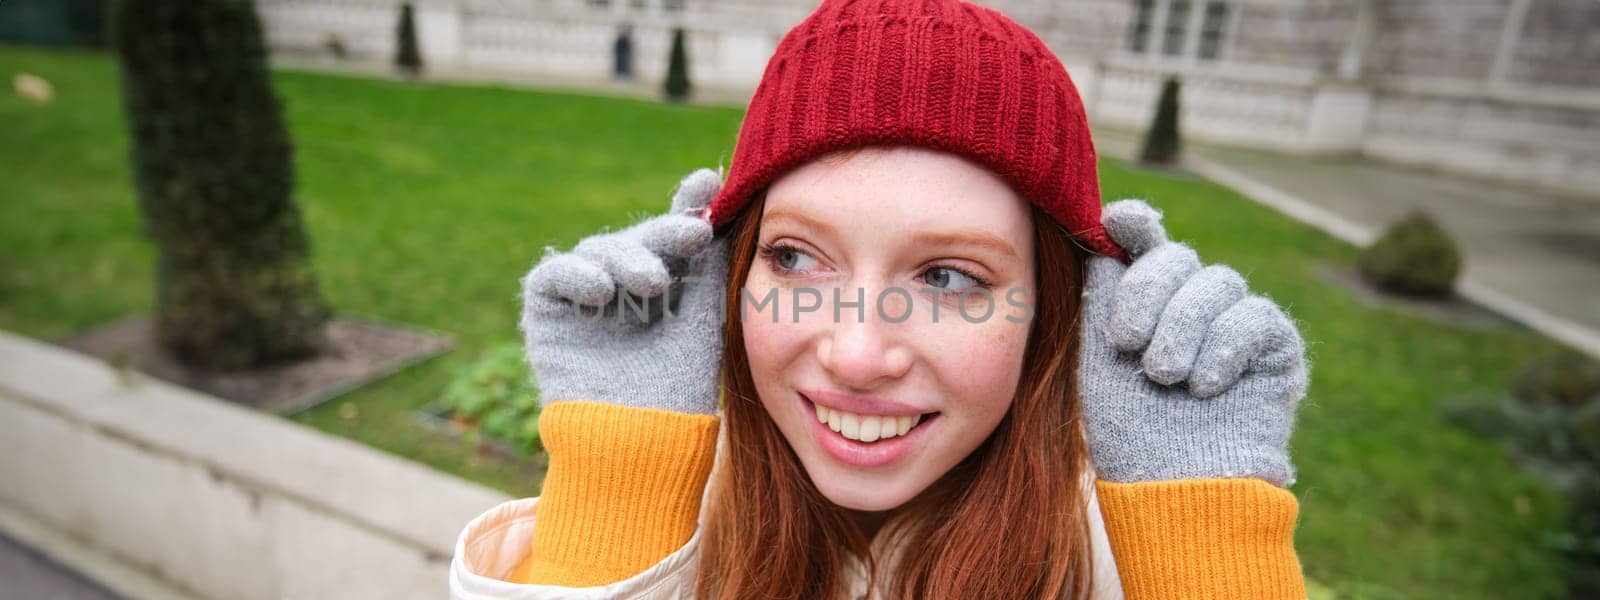 Cute girl student in red hat, warm gloves, sits in park, smiles and looks happy. Copy space